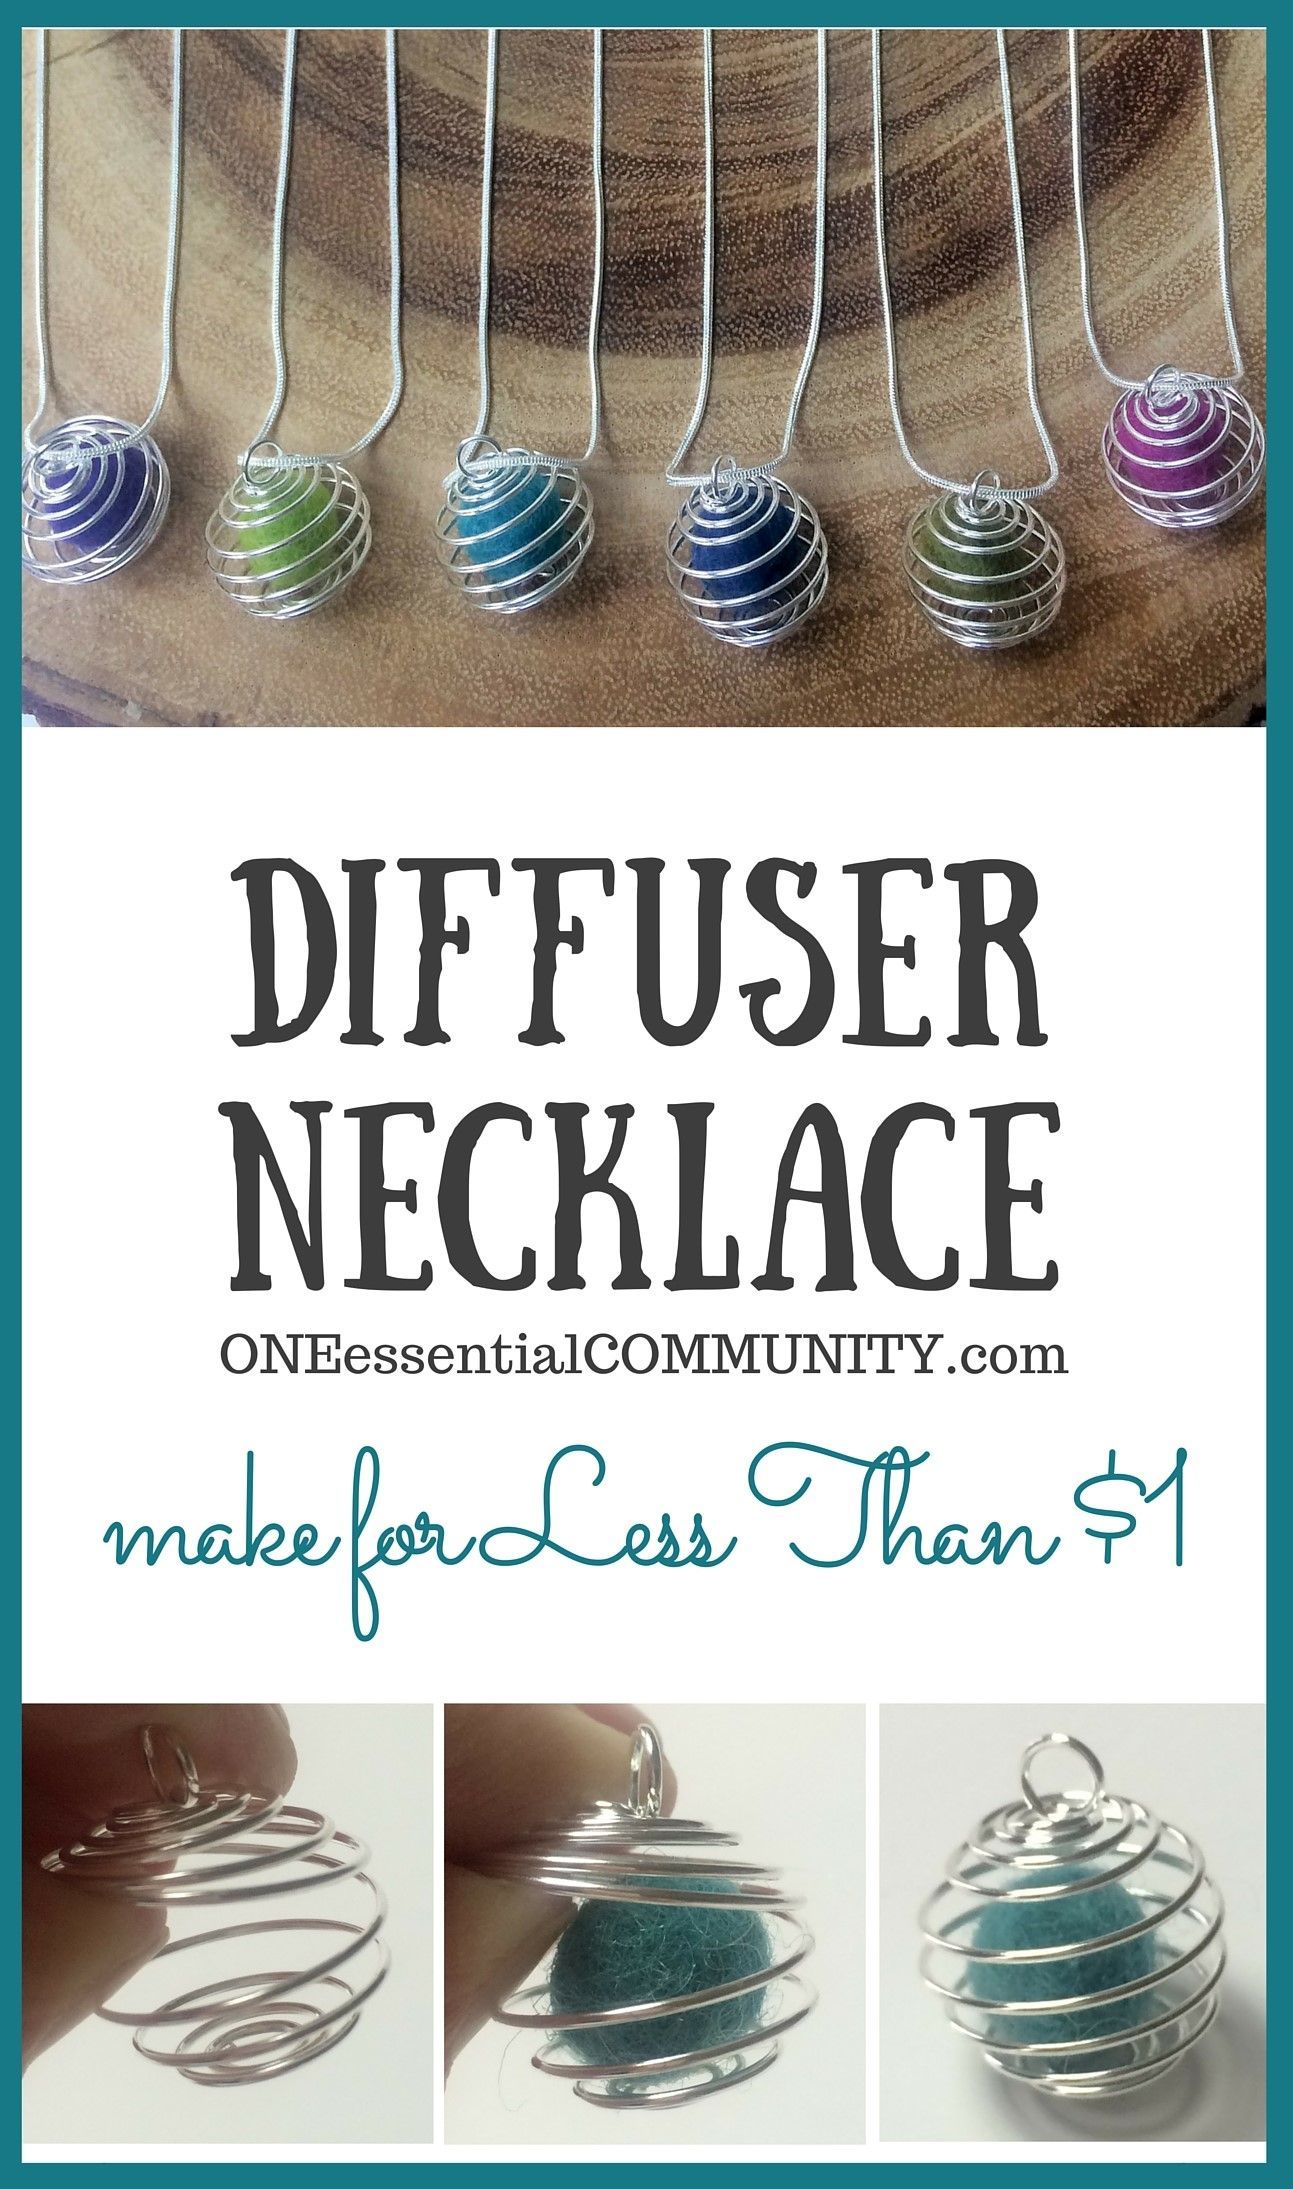 Make your own essential oil diffuser necklace for less than 1 buck each and in…